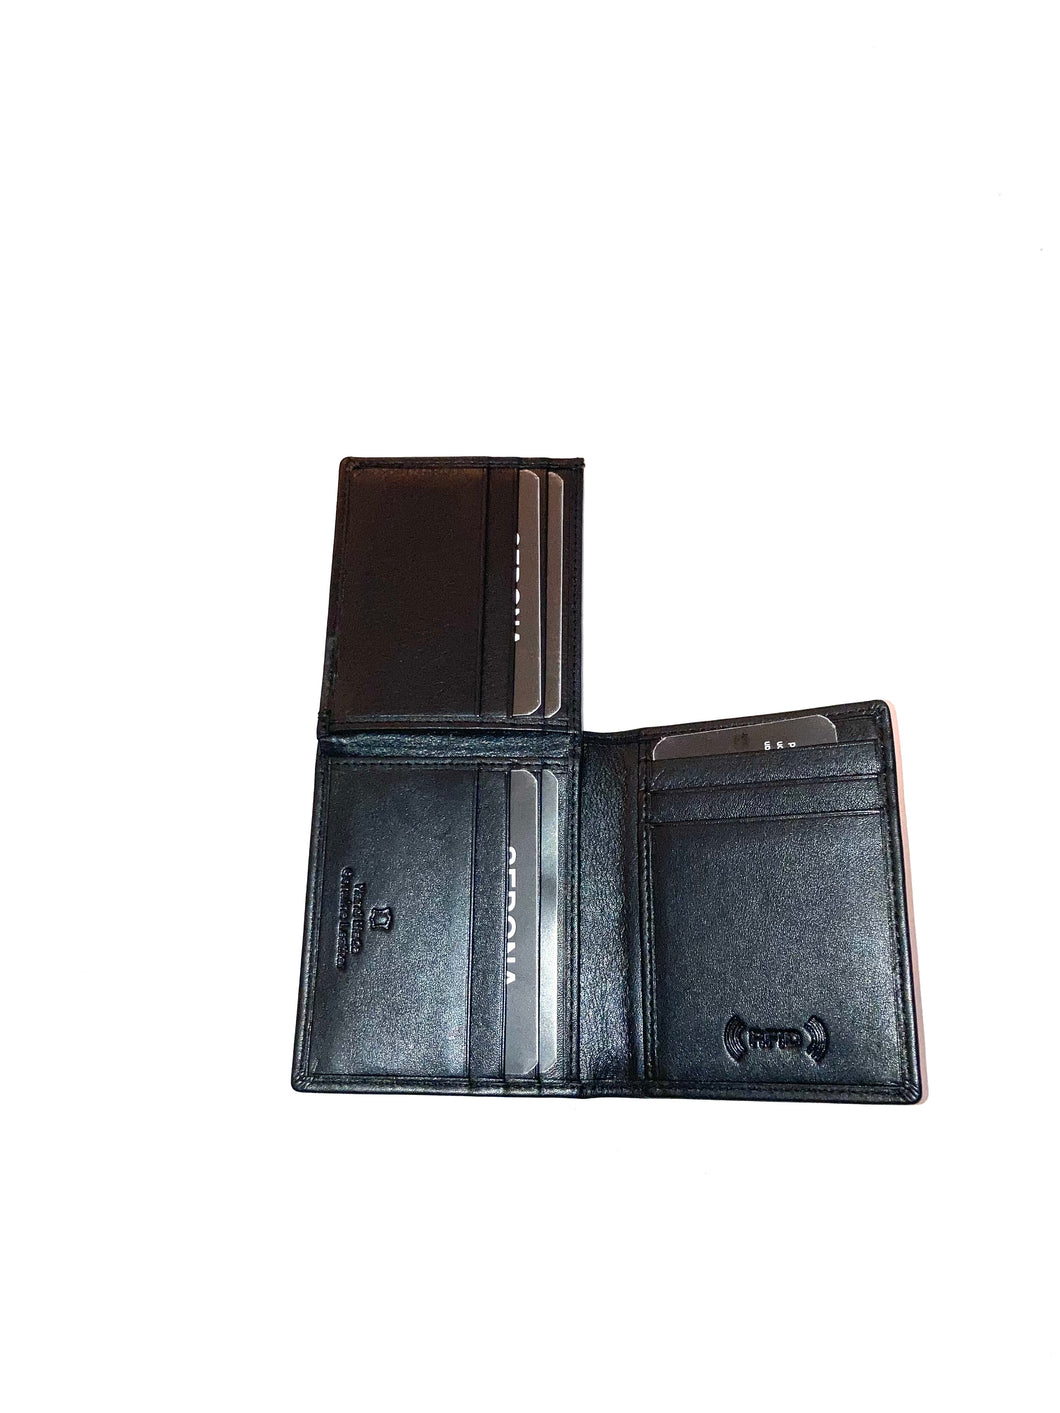 SEDONA®  L Shaped Wallet with RFID Protection